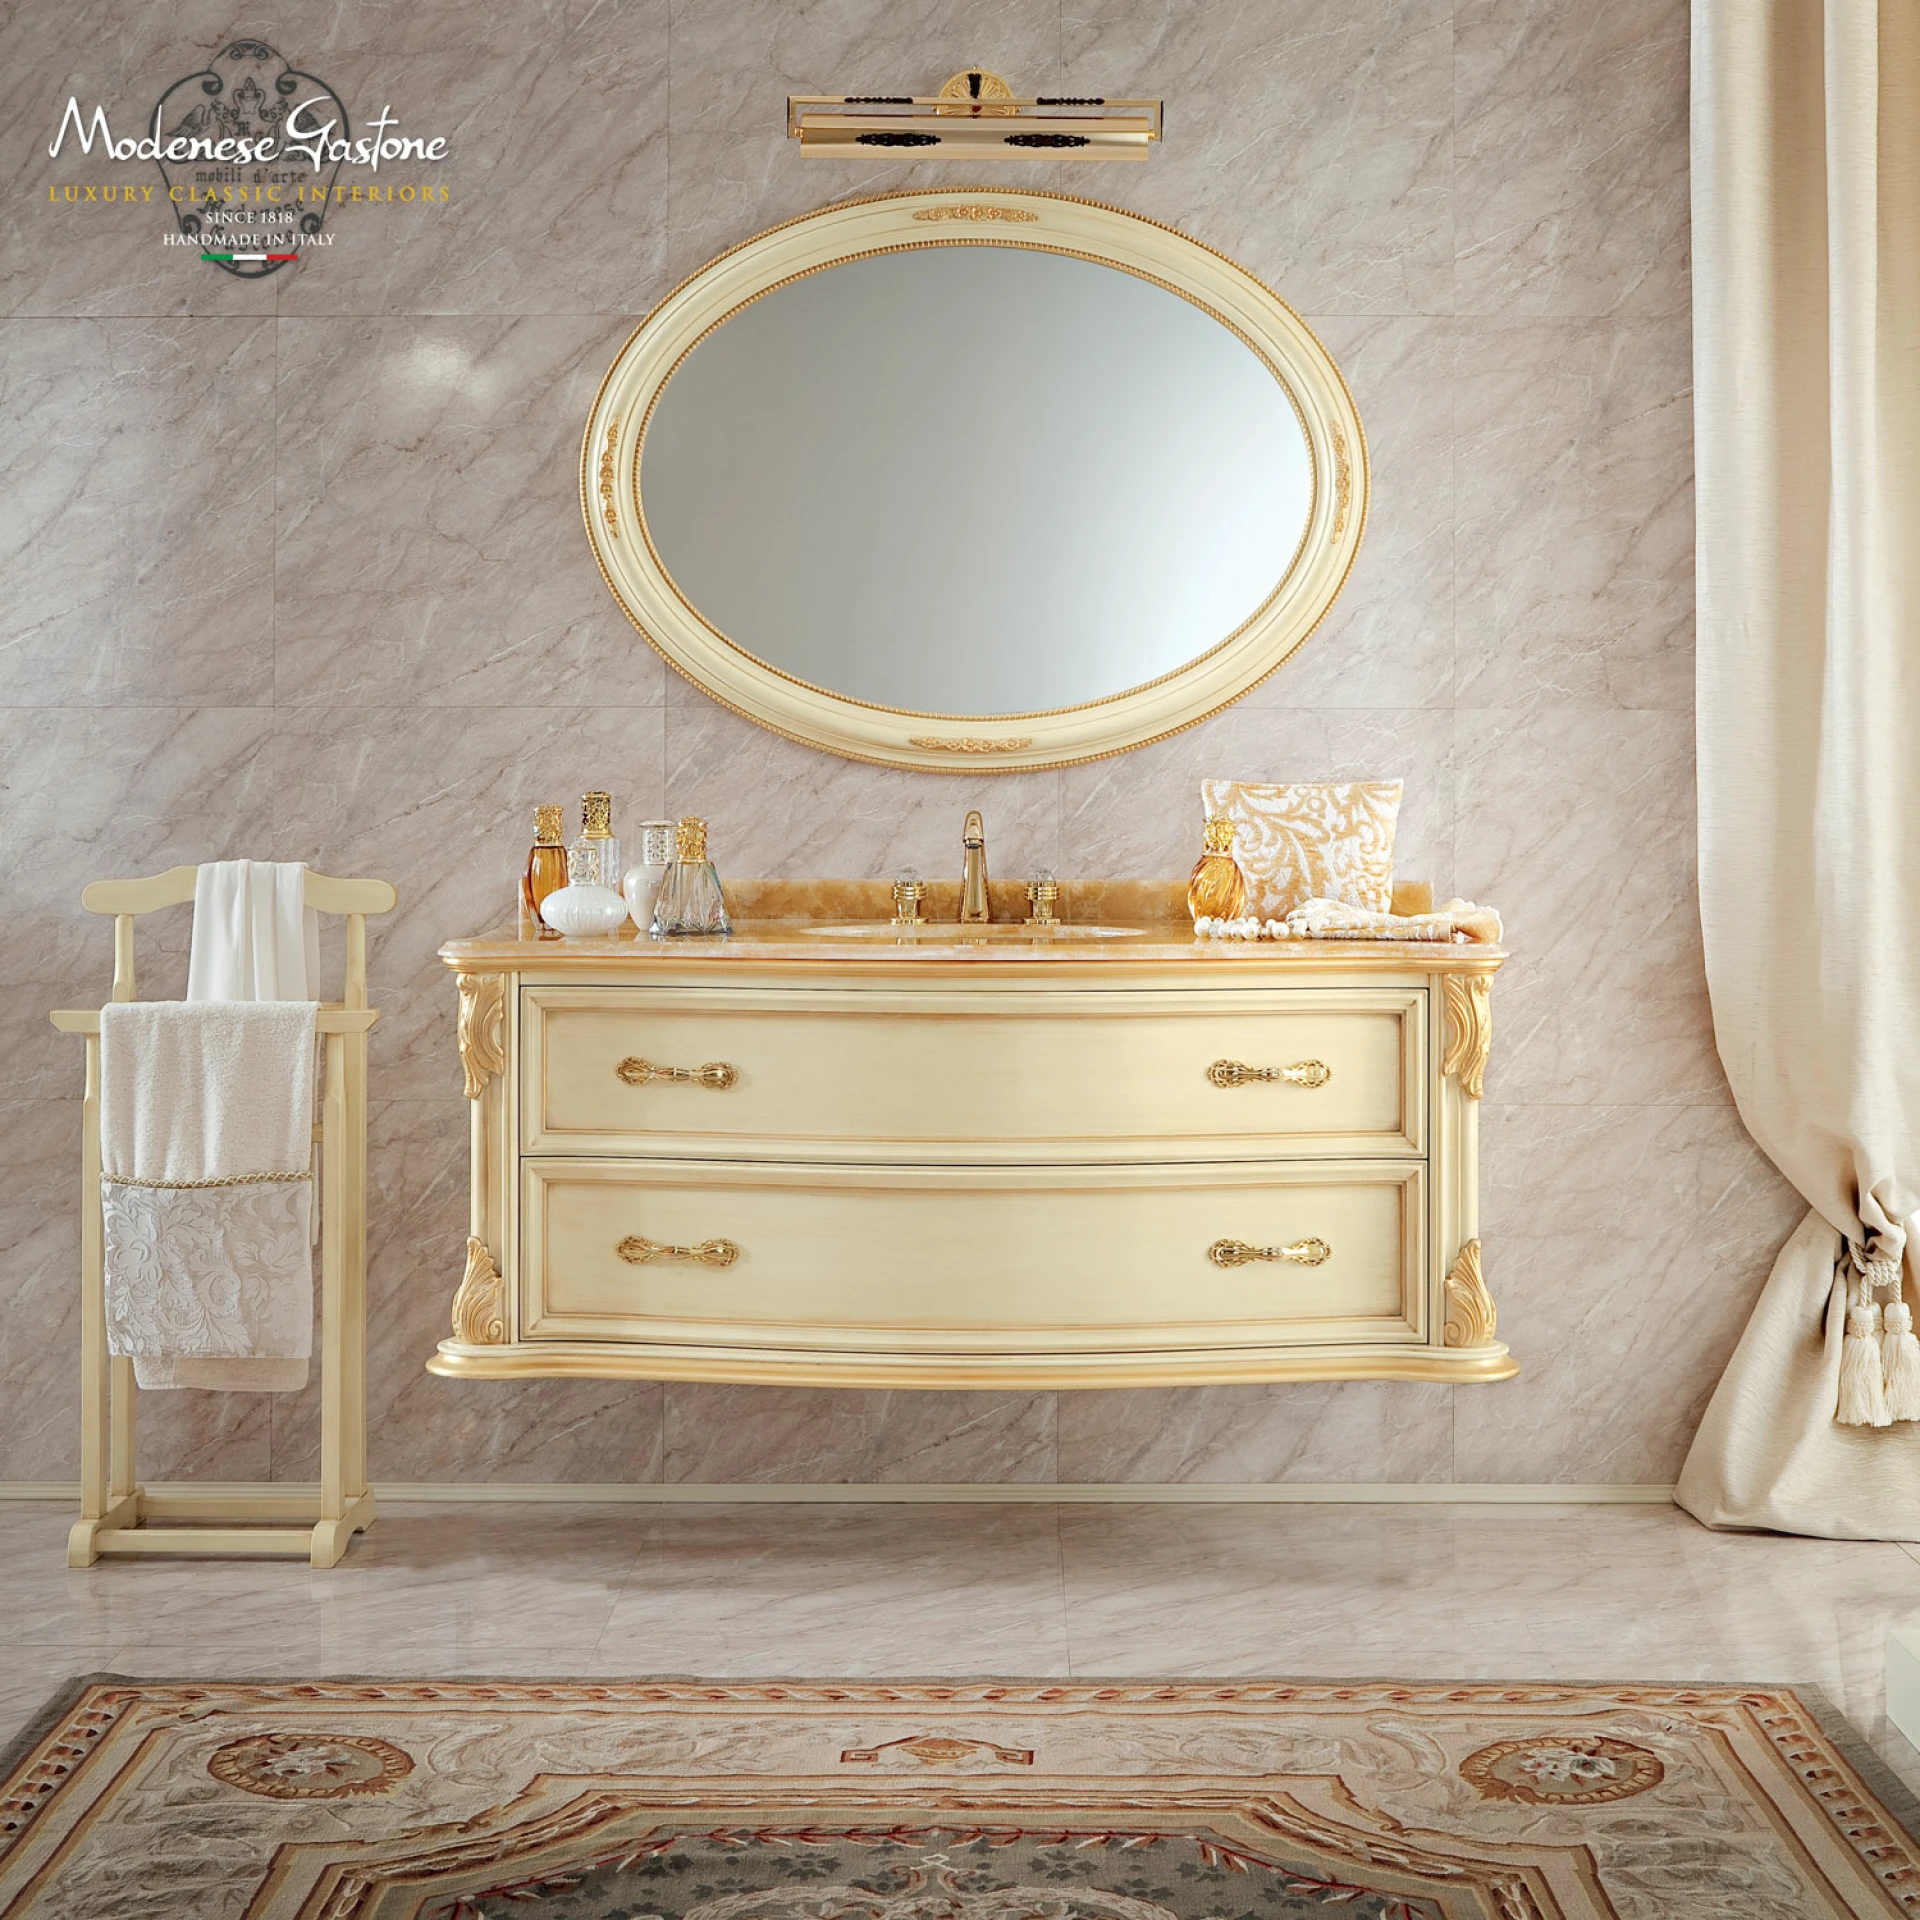 Best italian bathroom sink cabinet furniture in ivory finishing and gold leaf